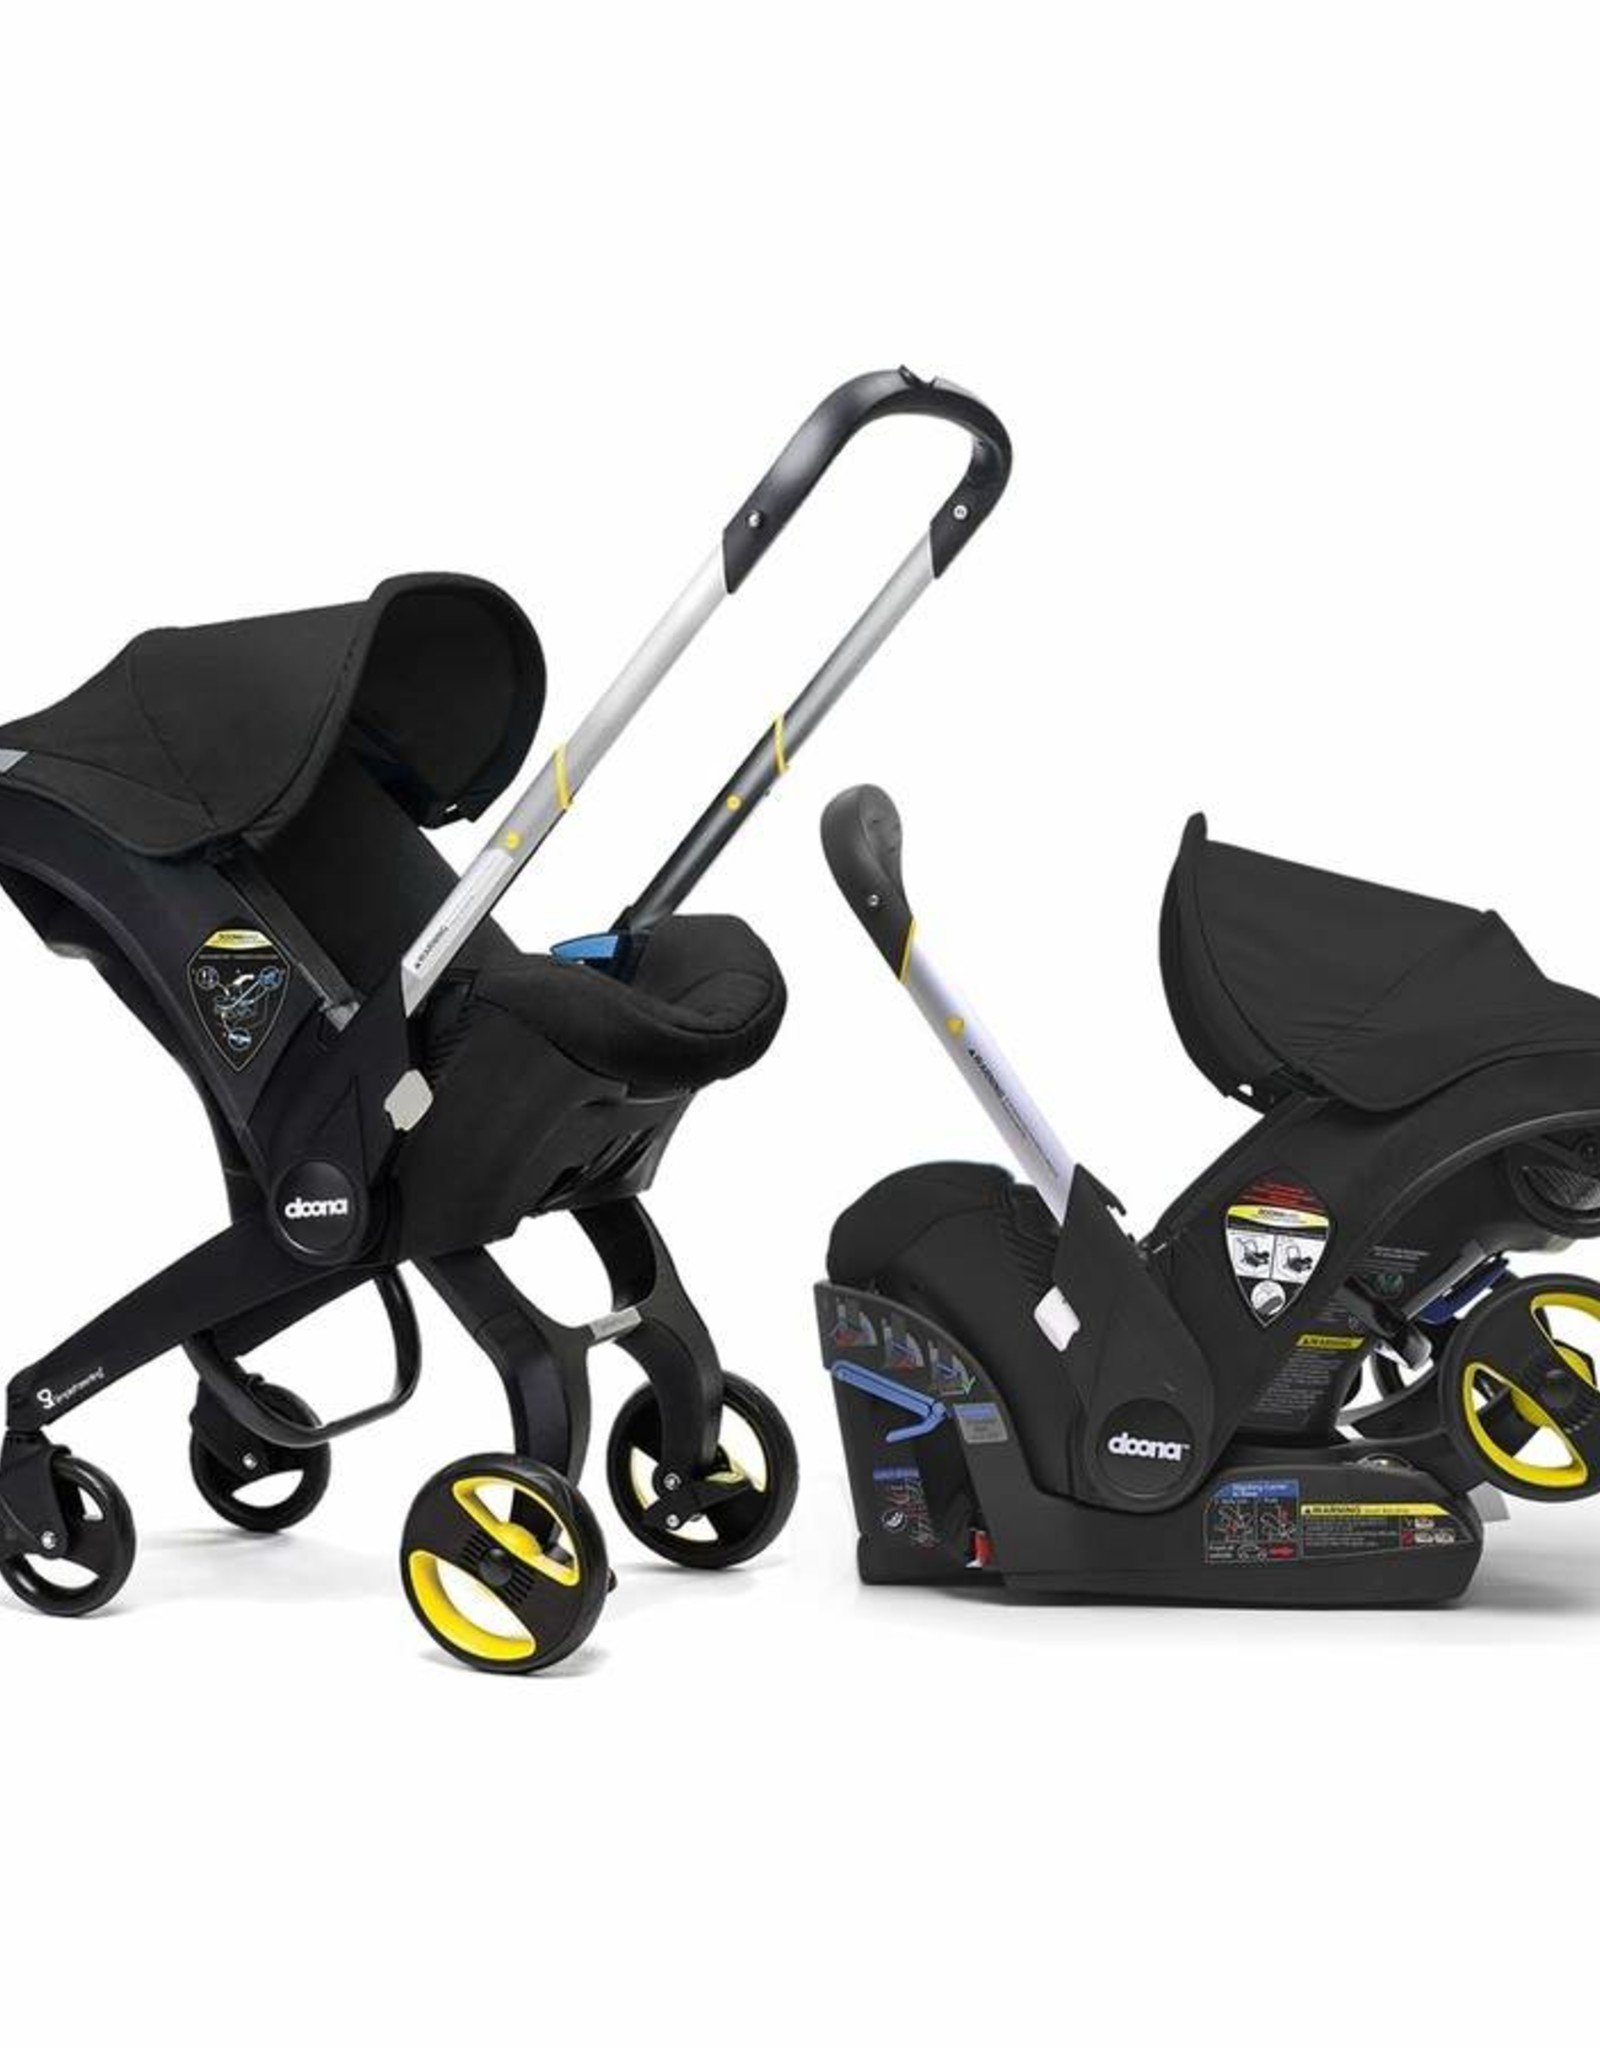 car seat that changes into stroller